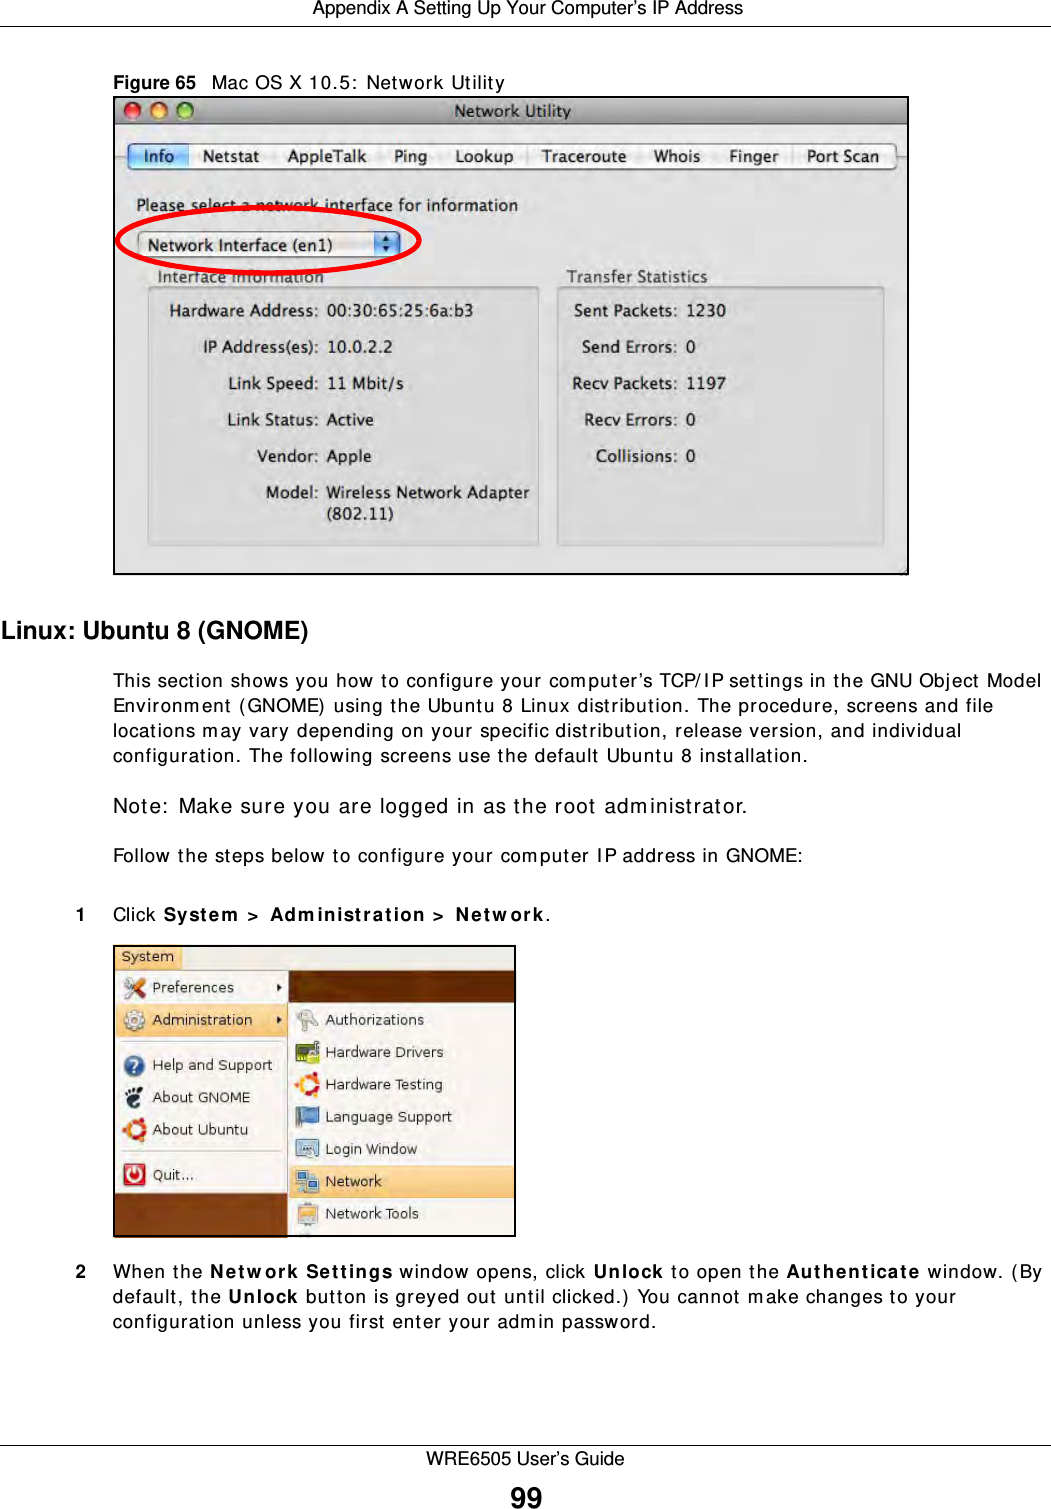  Appendix A Setting Up Your Computer’s IP AddressWRE6505 User’s Guide99Figure 65   Mac OS X 10.5:  Network UtilityLinux: Ubuntu 8 (GNOME)This section shows you how to configure your computer’s TCP/ I P settings in the GNU Object Model Environm ent (GNOME) using the Ubuntu 8 Linux distribution. The procedure, screens and file locations m ay vary depending on your specific distribution, release version, and individual configuration. The following screens use the default Ubuntu 8 installation.Note:  Make sure you are logged in as the root adm inistrator. Follow the steps below to configure your computer I P address in GNOME:  1Click Syst e m  &gt;  Adm inistra t ion &gt;  N et w or k.2When the N etw ork Settings window opens, click U n lock  to open the Au t he nt ica t e window. (By default, the Unlock button is greyed out until clicked.) You cannot m ake changes to your configuration unless you first enter your adm in password.